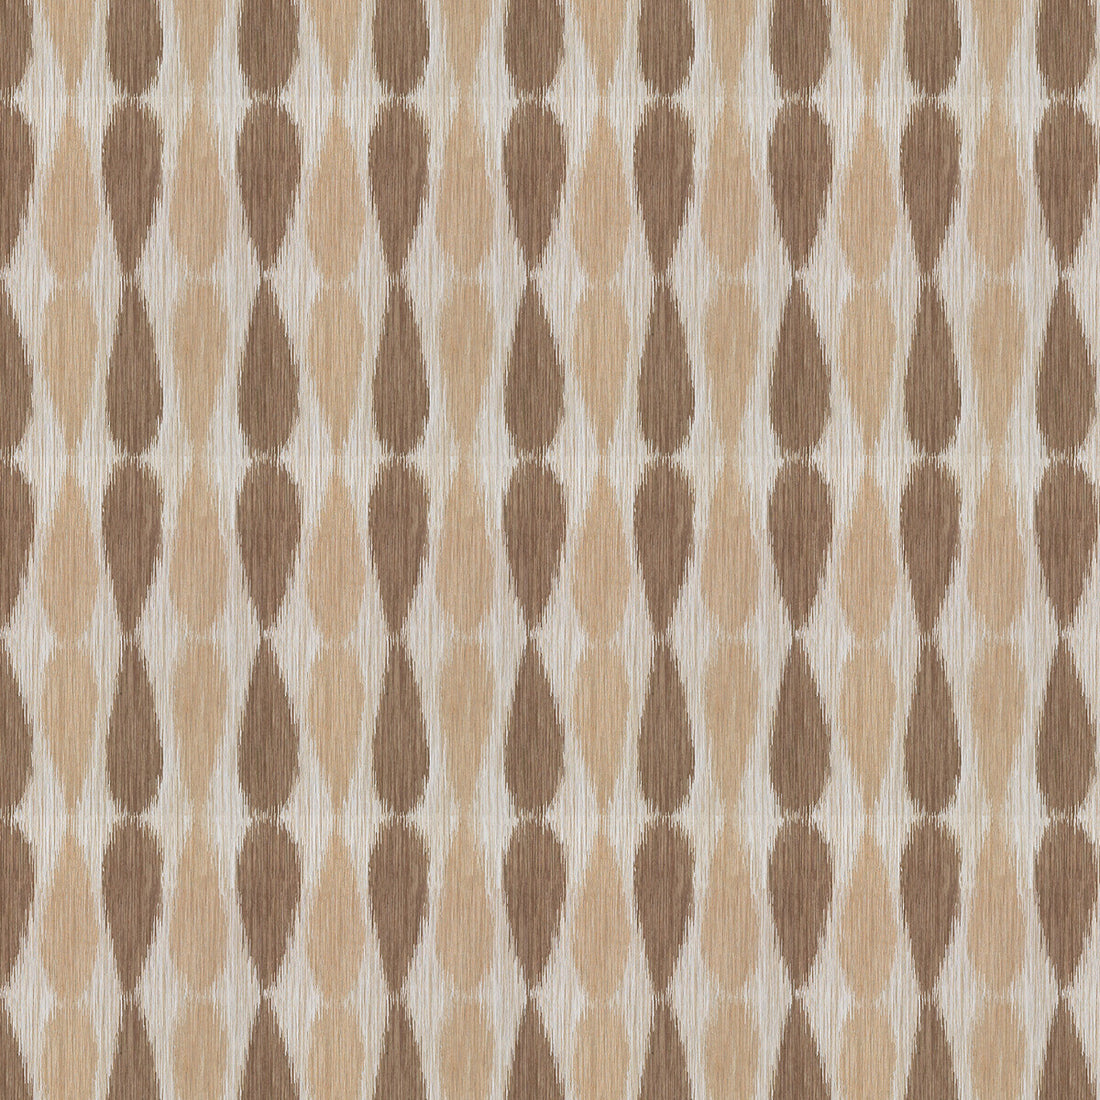 Ikat Drops fabric in taupe color - pattern GWF-2927.116.0 - by Lee Jofa Modern in the Allegra Hicks II collection